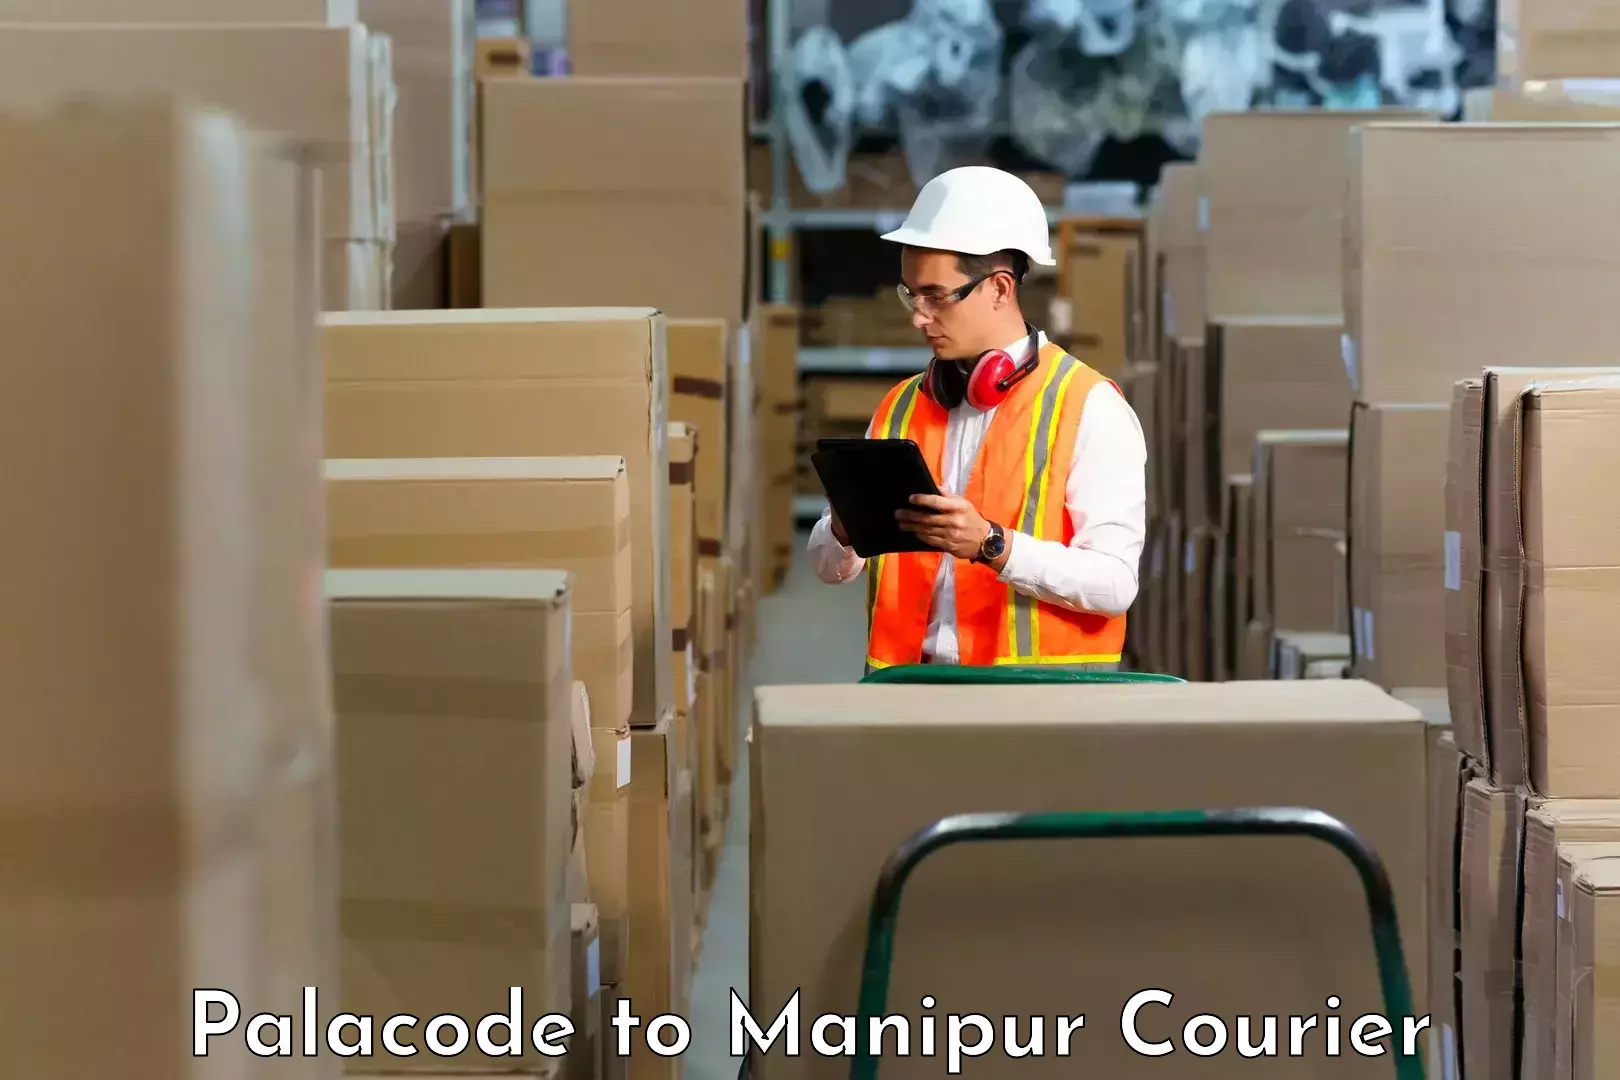 User-friendly delivery service Palacode to Manipur